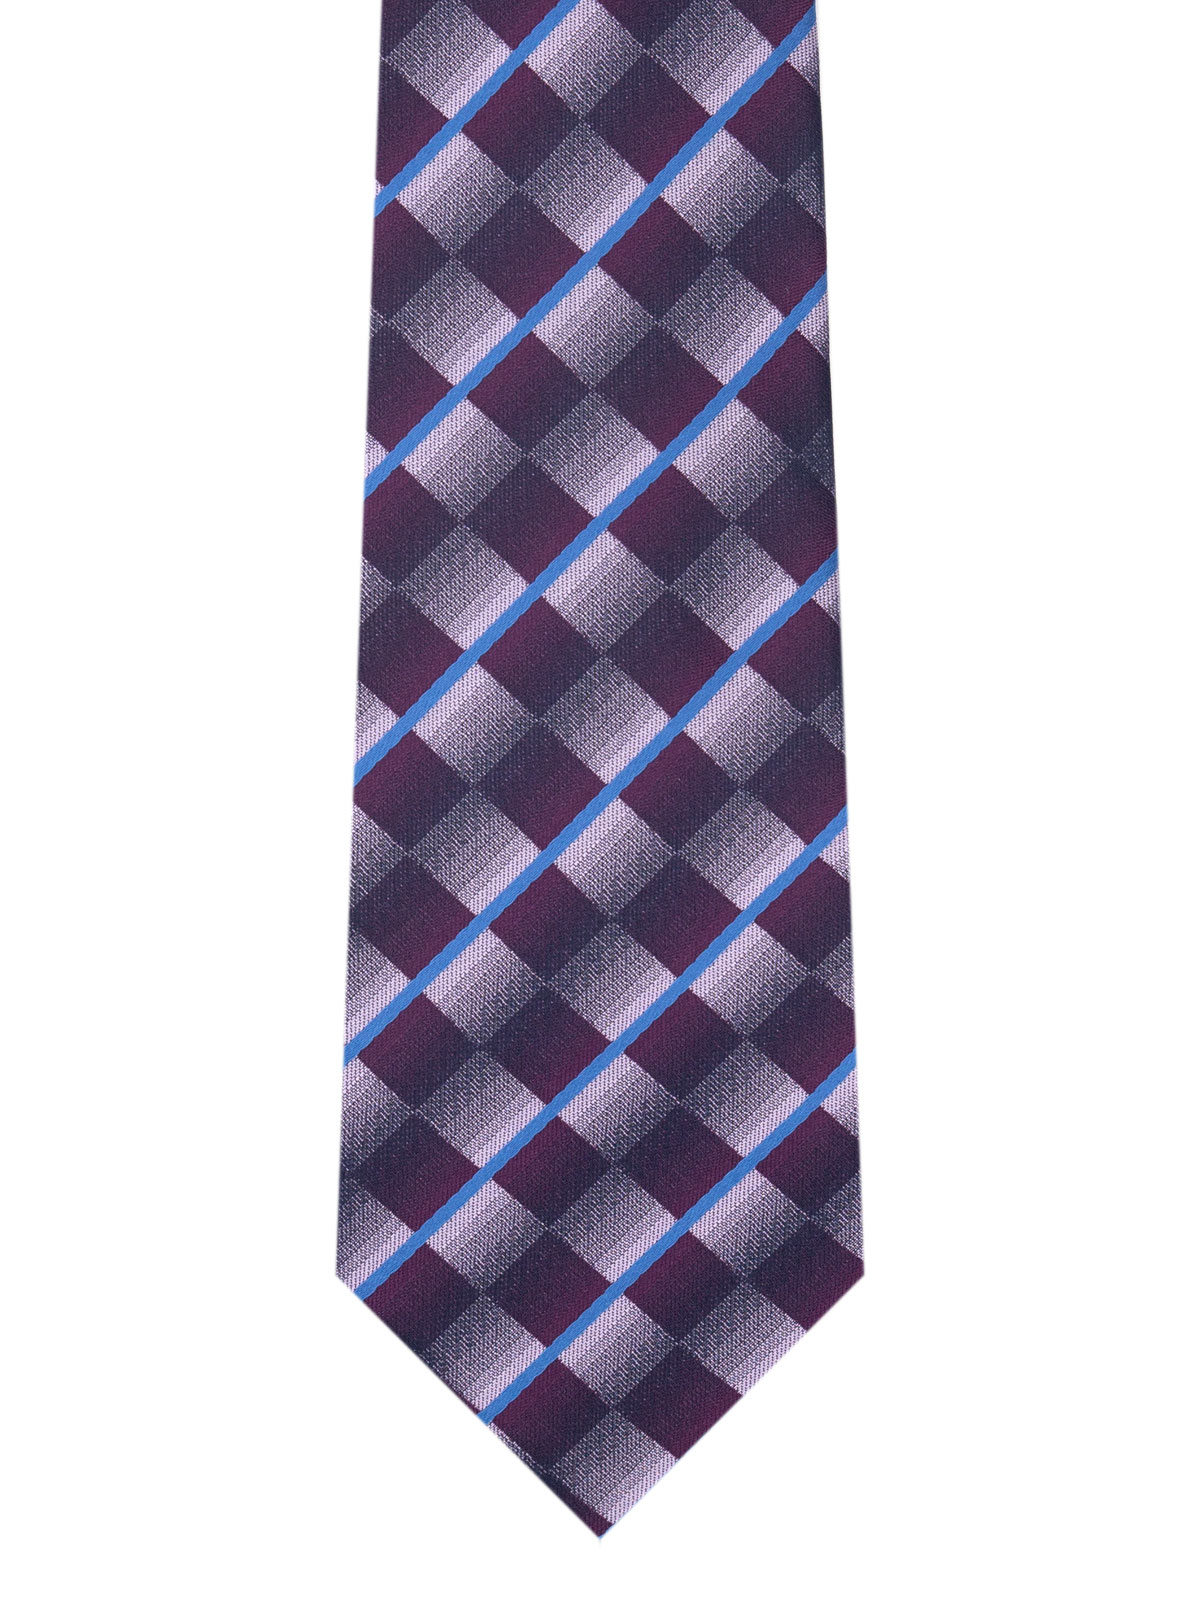 A spectacular tie of lines and squares - 10181 - € 14.06 img2